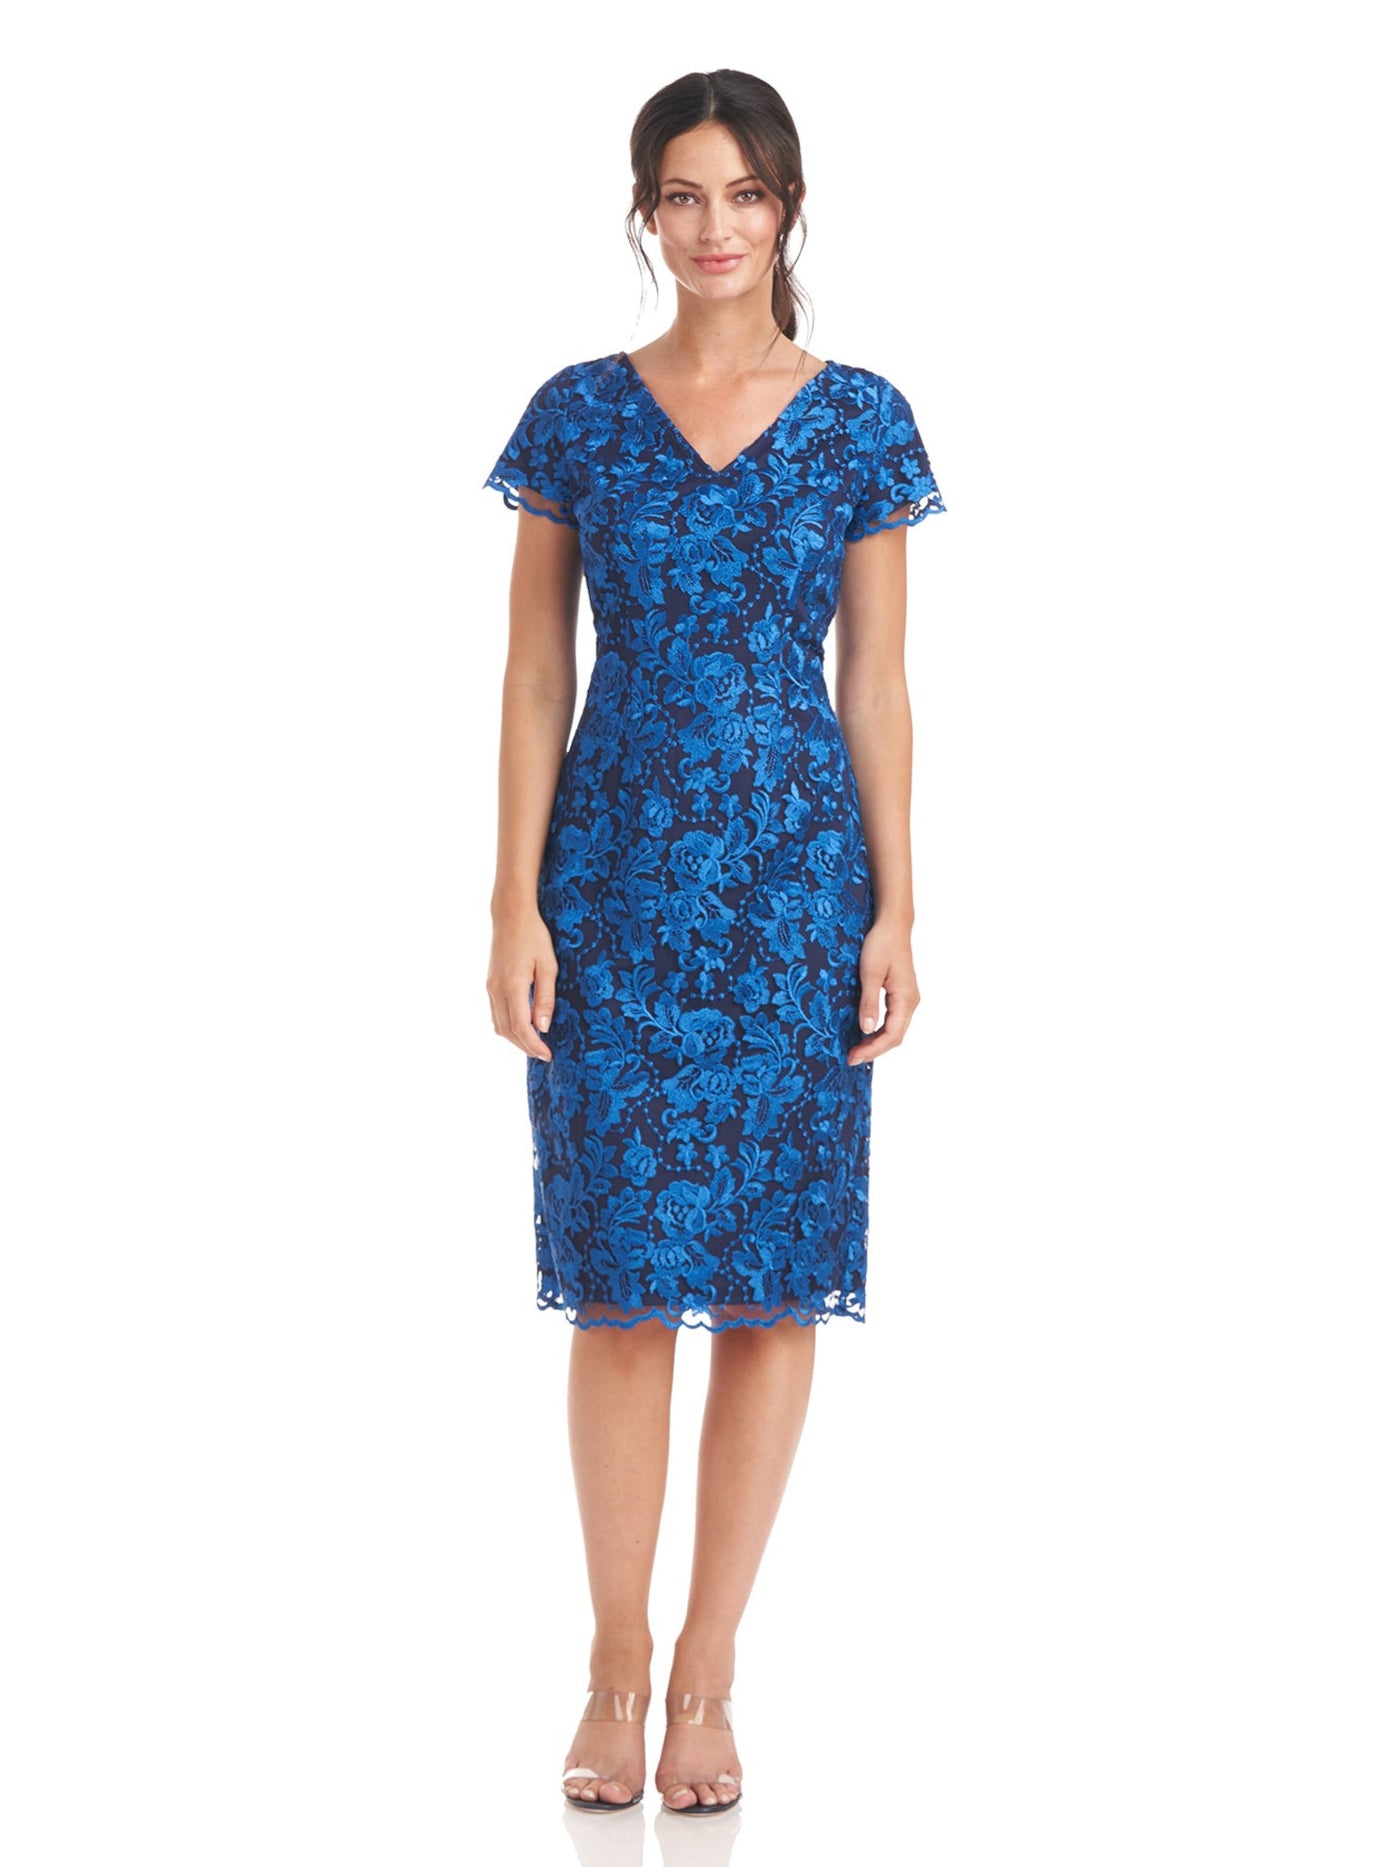 JS COLLECTION Womens Blue Embroidered Zippered Scalloped Mesh Floral Short Sleeve V Neck Below The Knee Party Sheath Dress 6